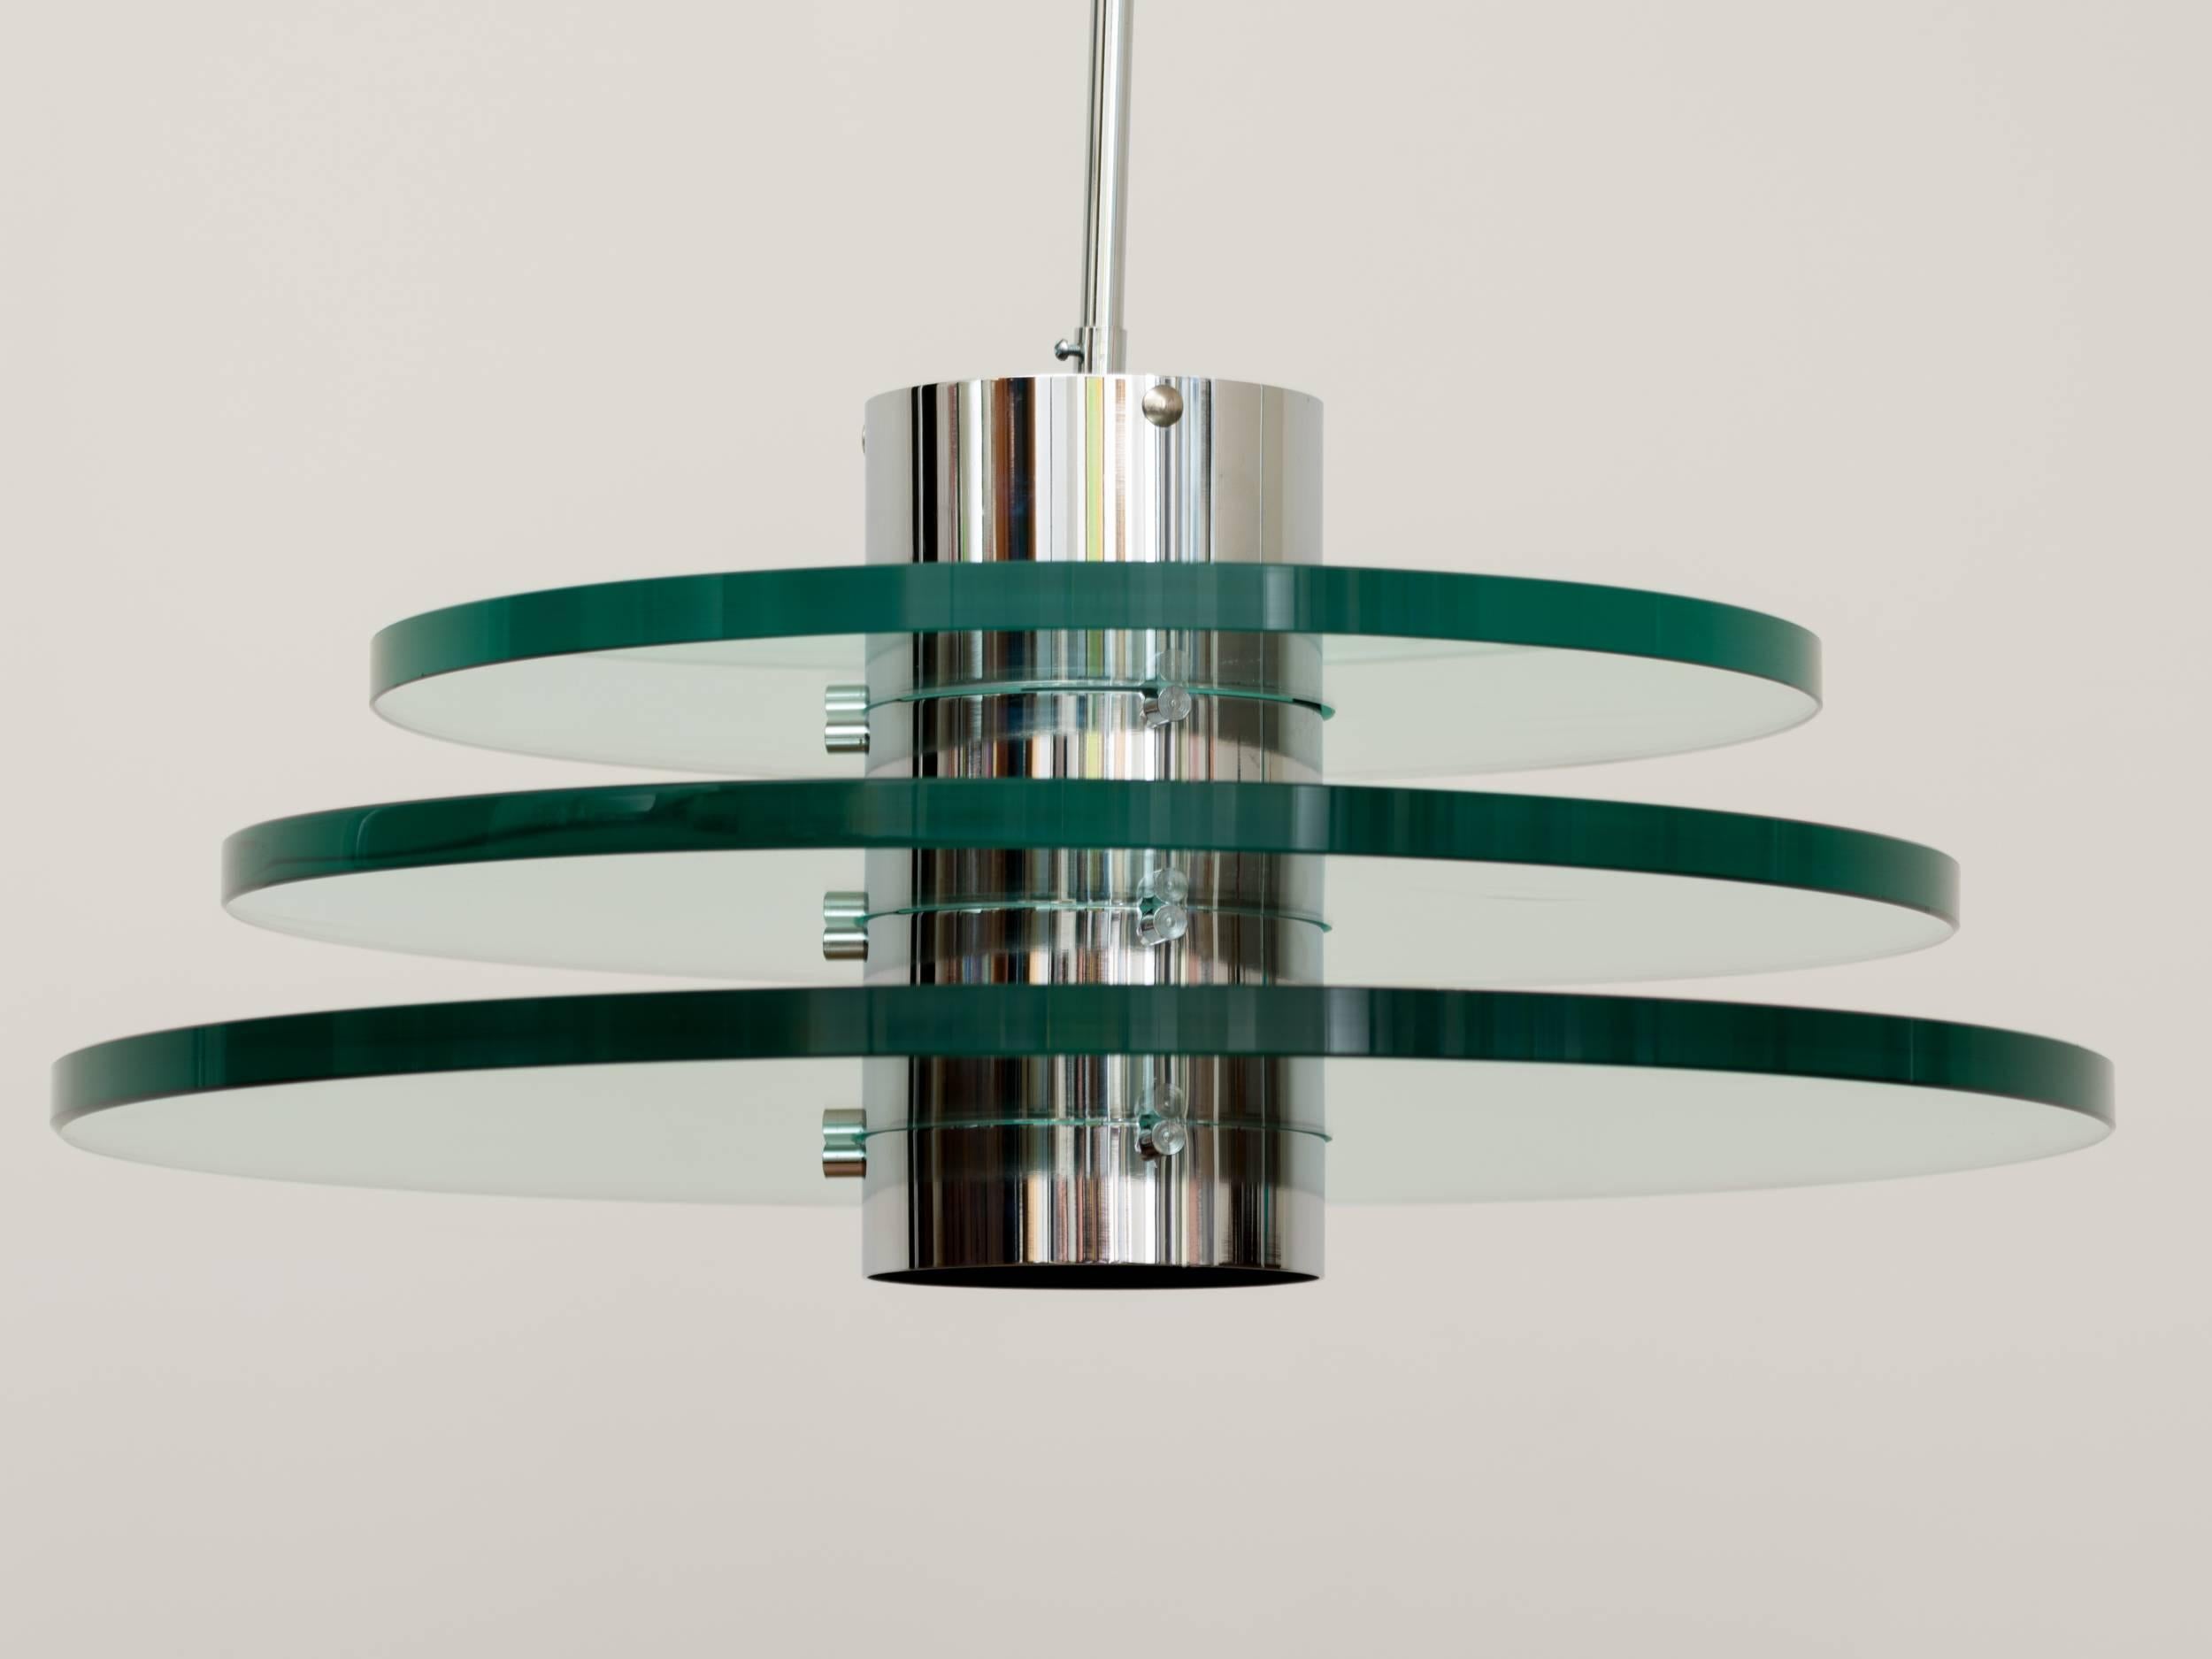 Postmodern triple glass disc chandelier with nickeled central column and stem.
Glass discs measure three quarters inch thick. They slide into central column, held with metal hardware. Purchased directly from original owner.
 